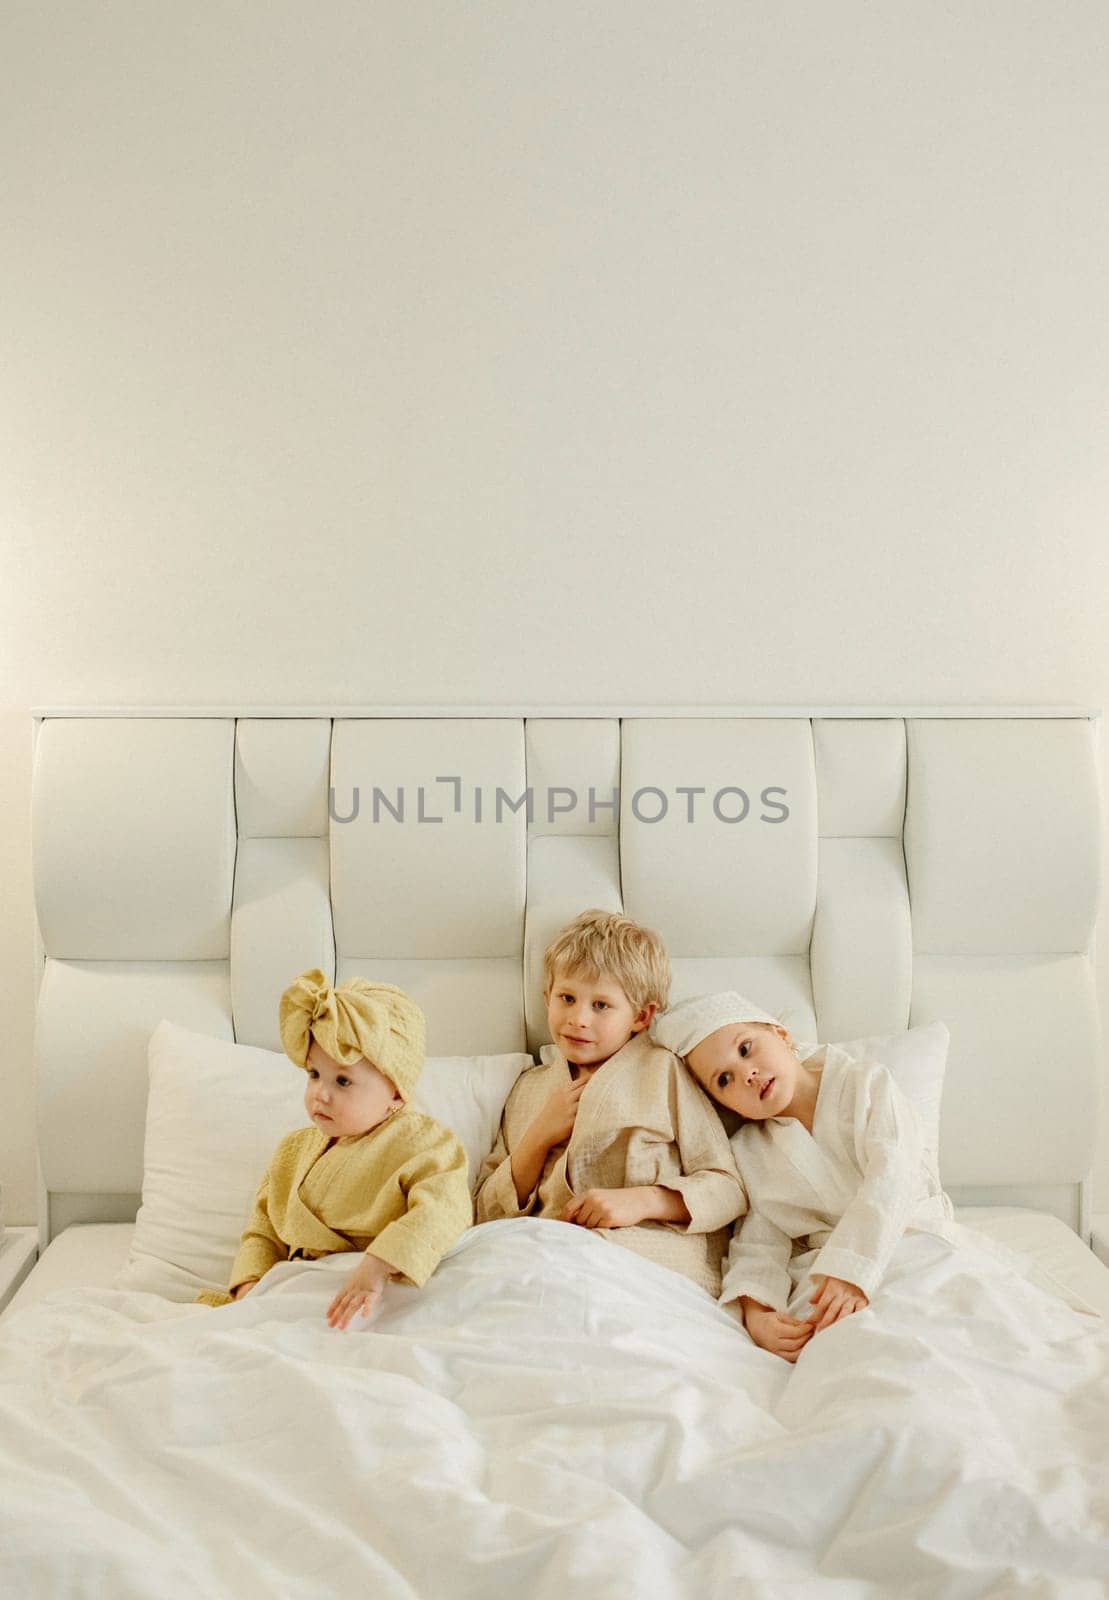 Children lie in a white bed in bathrobes after taking a bath, smiling and looking at the camera. View from above.